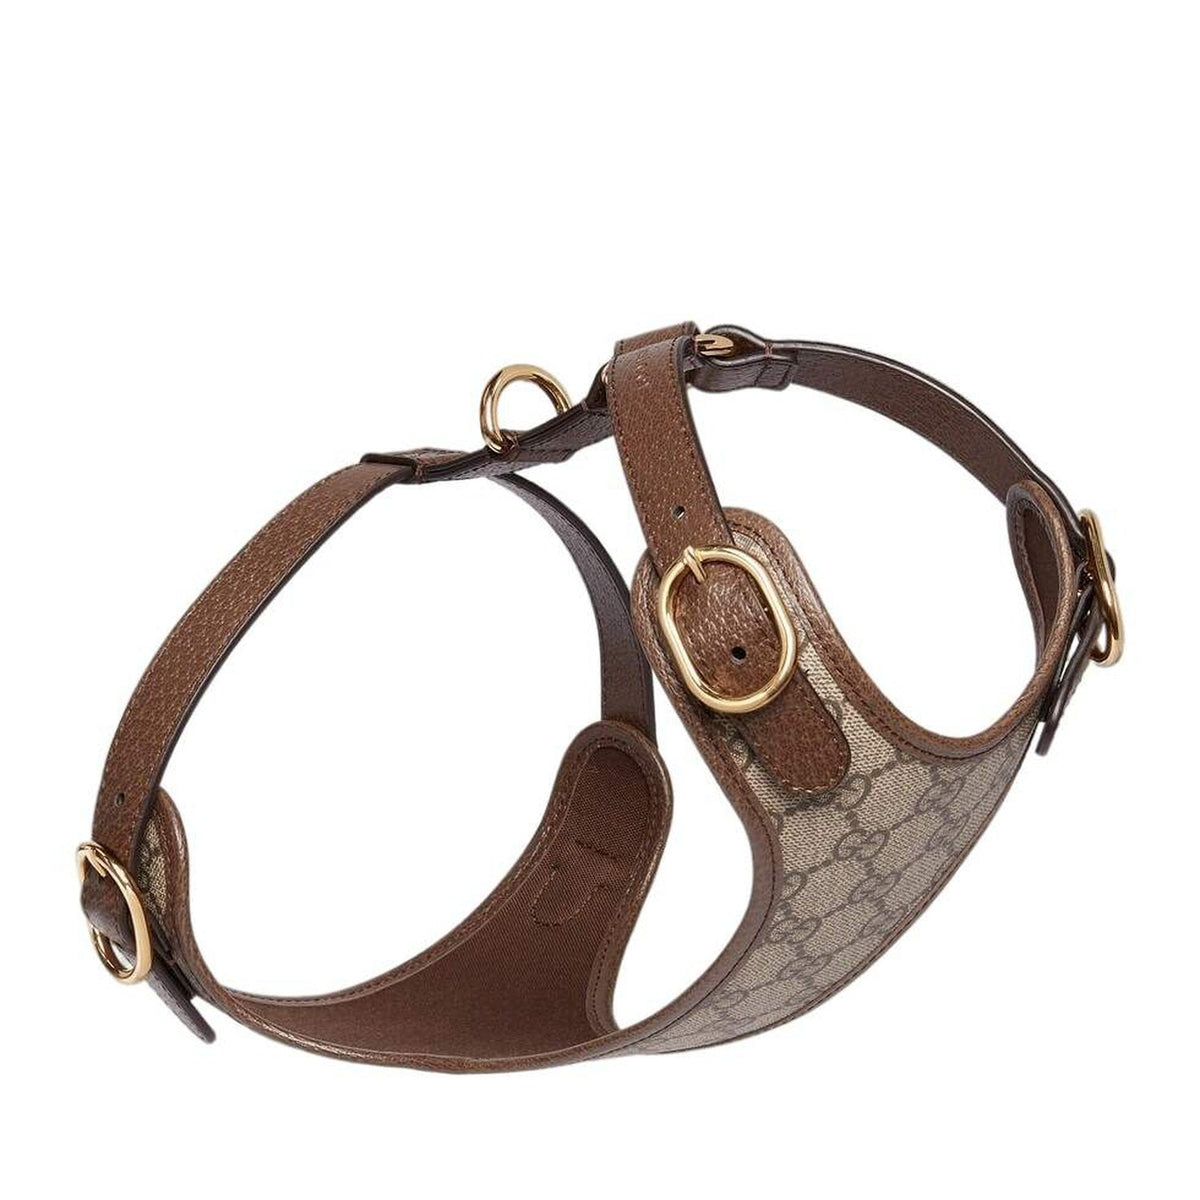 Pawcci Designer Leather Dog Harness, Collar and Leash